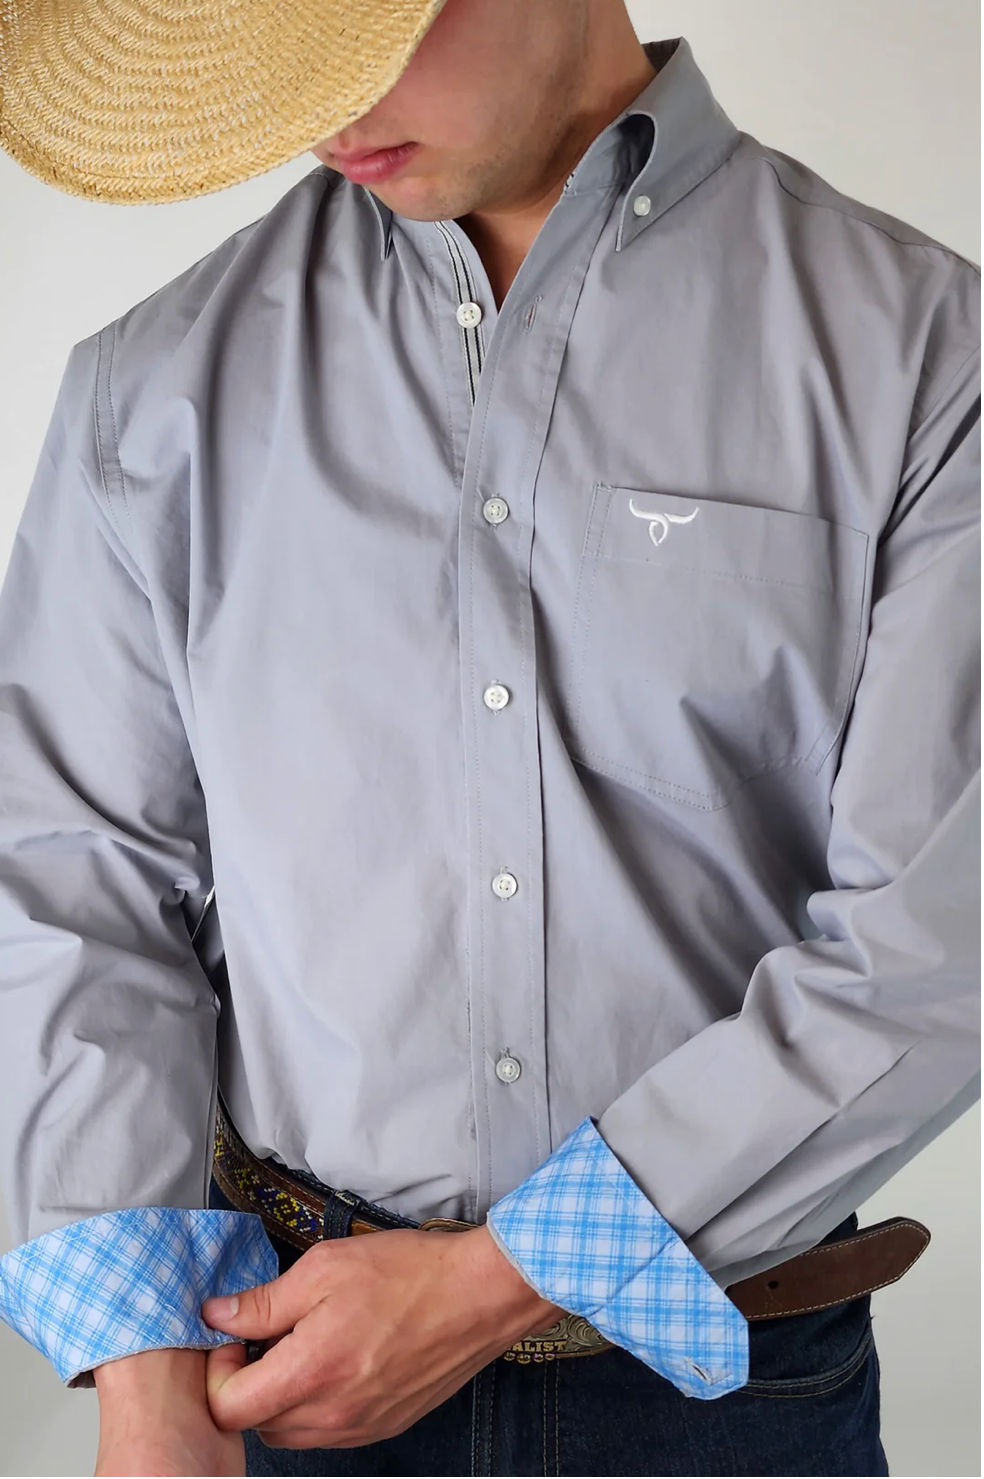 Drover Signature Series - Bandit - Solid Charcoal Gray, Option Cuff, Classic Fit Shirt D108